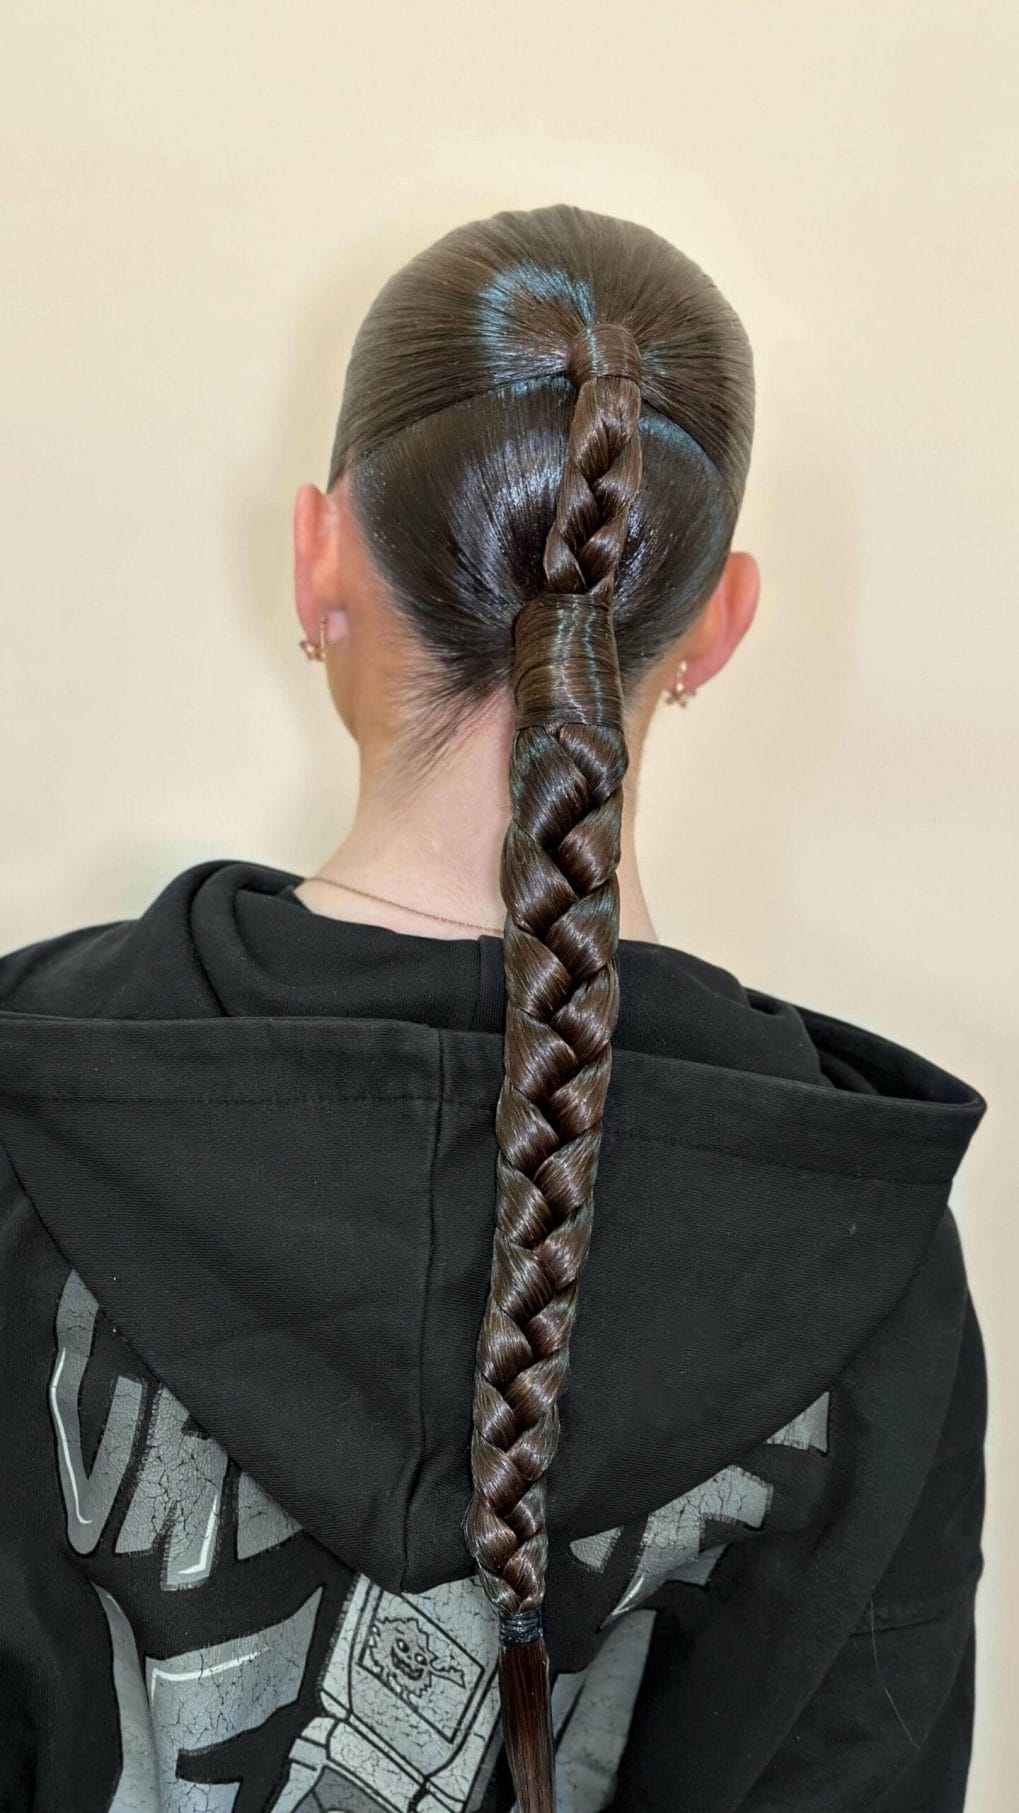 Long, tight braid ideal for secure dance performances